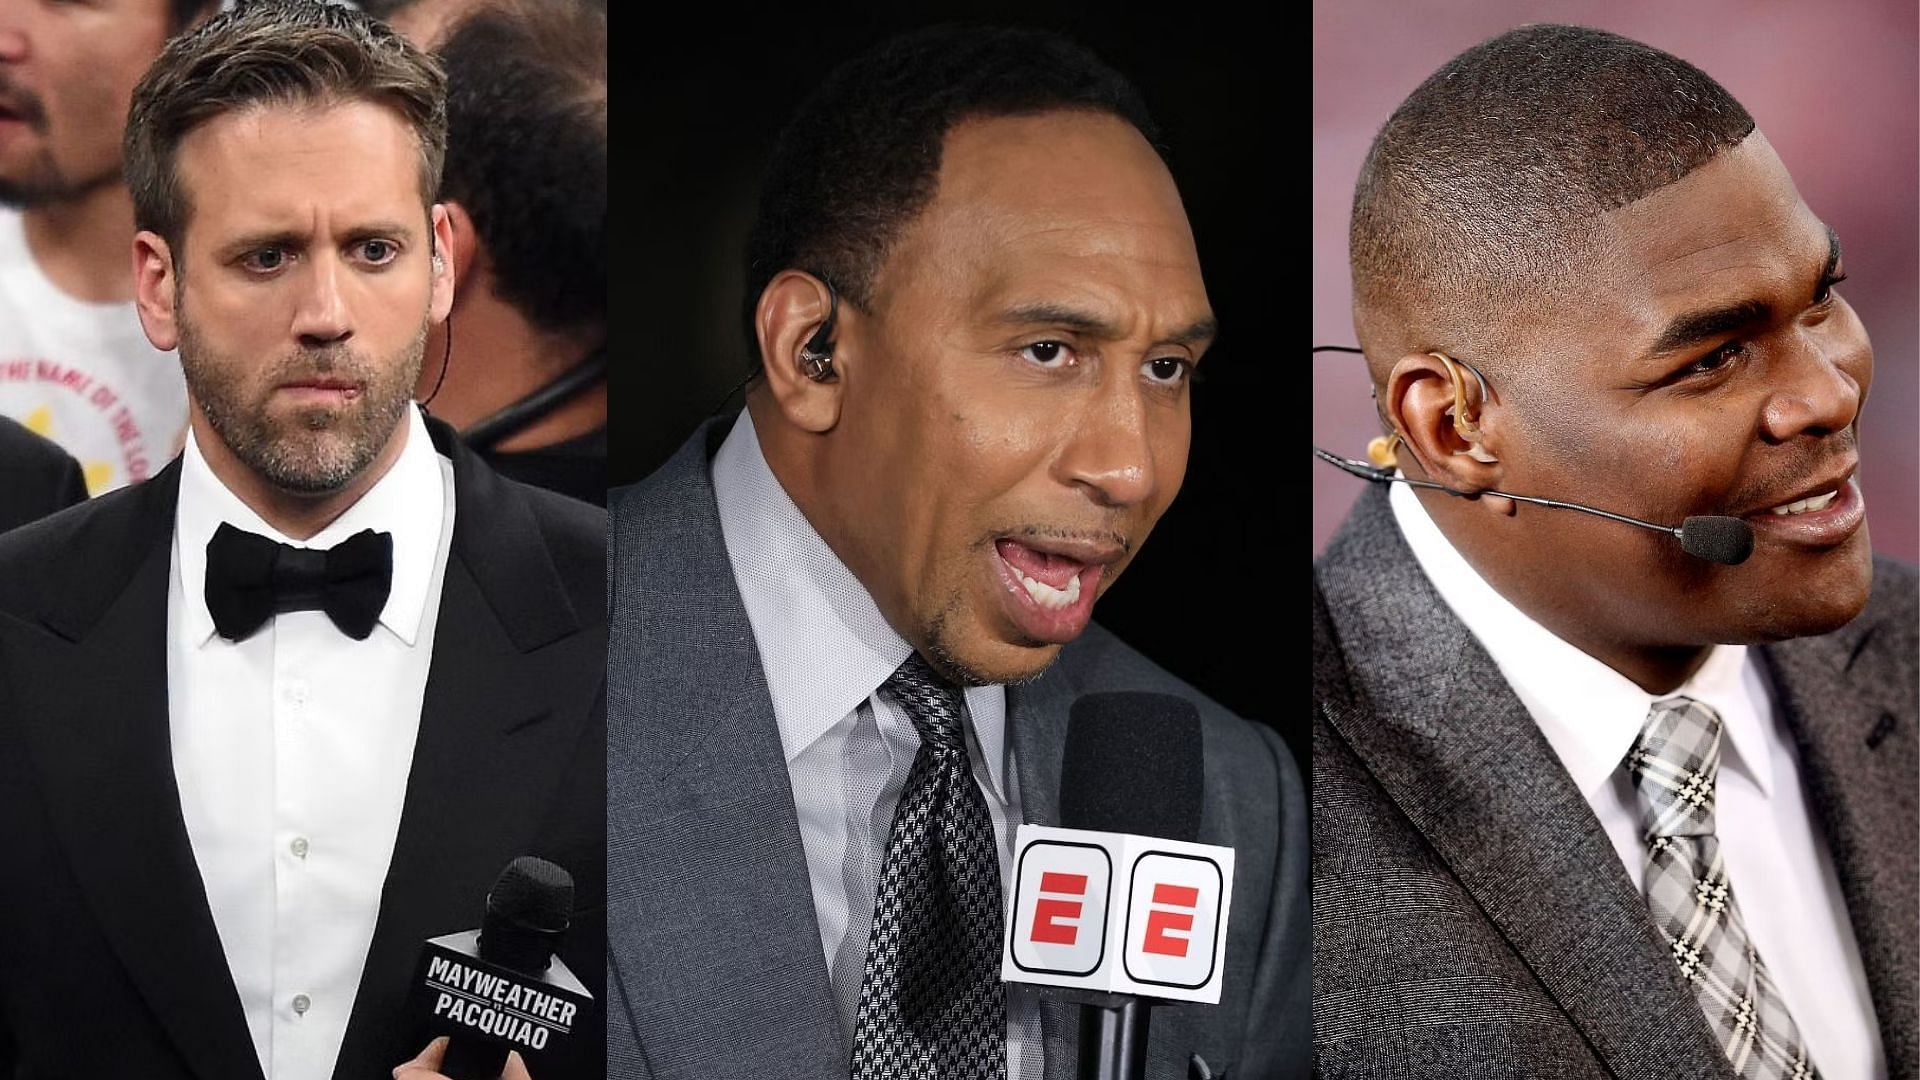 ESPN personality Stephen A Smith addressed the recent layoffs of his former colleagues, including Max Kellerman and Keyshawn Johnson.